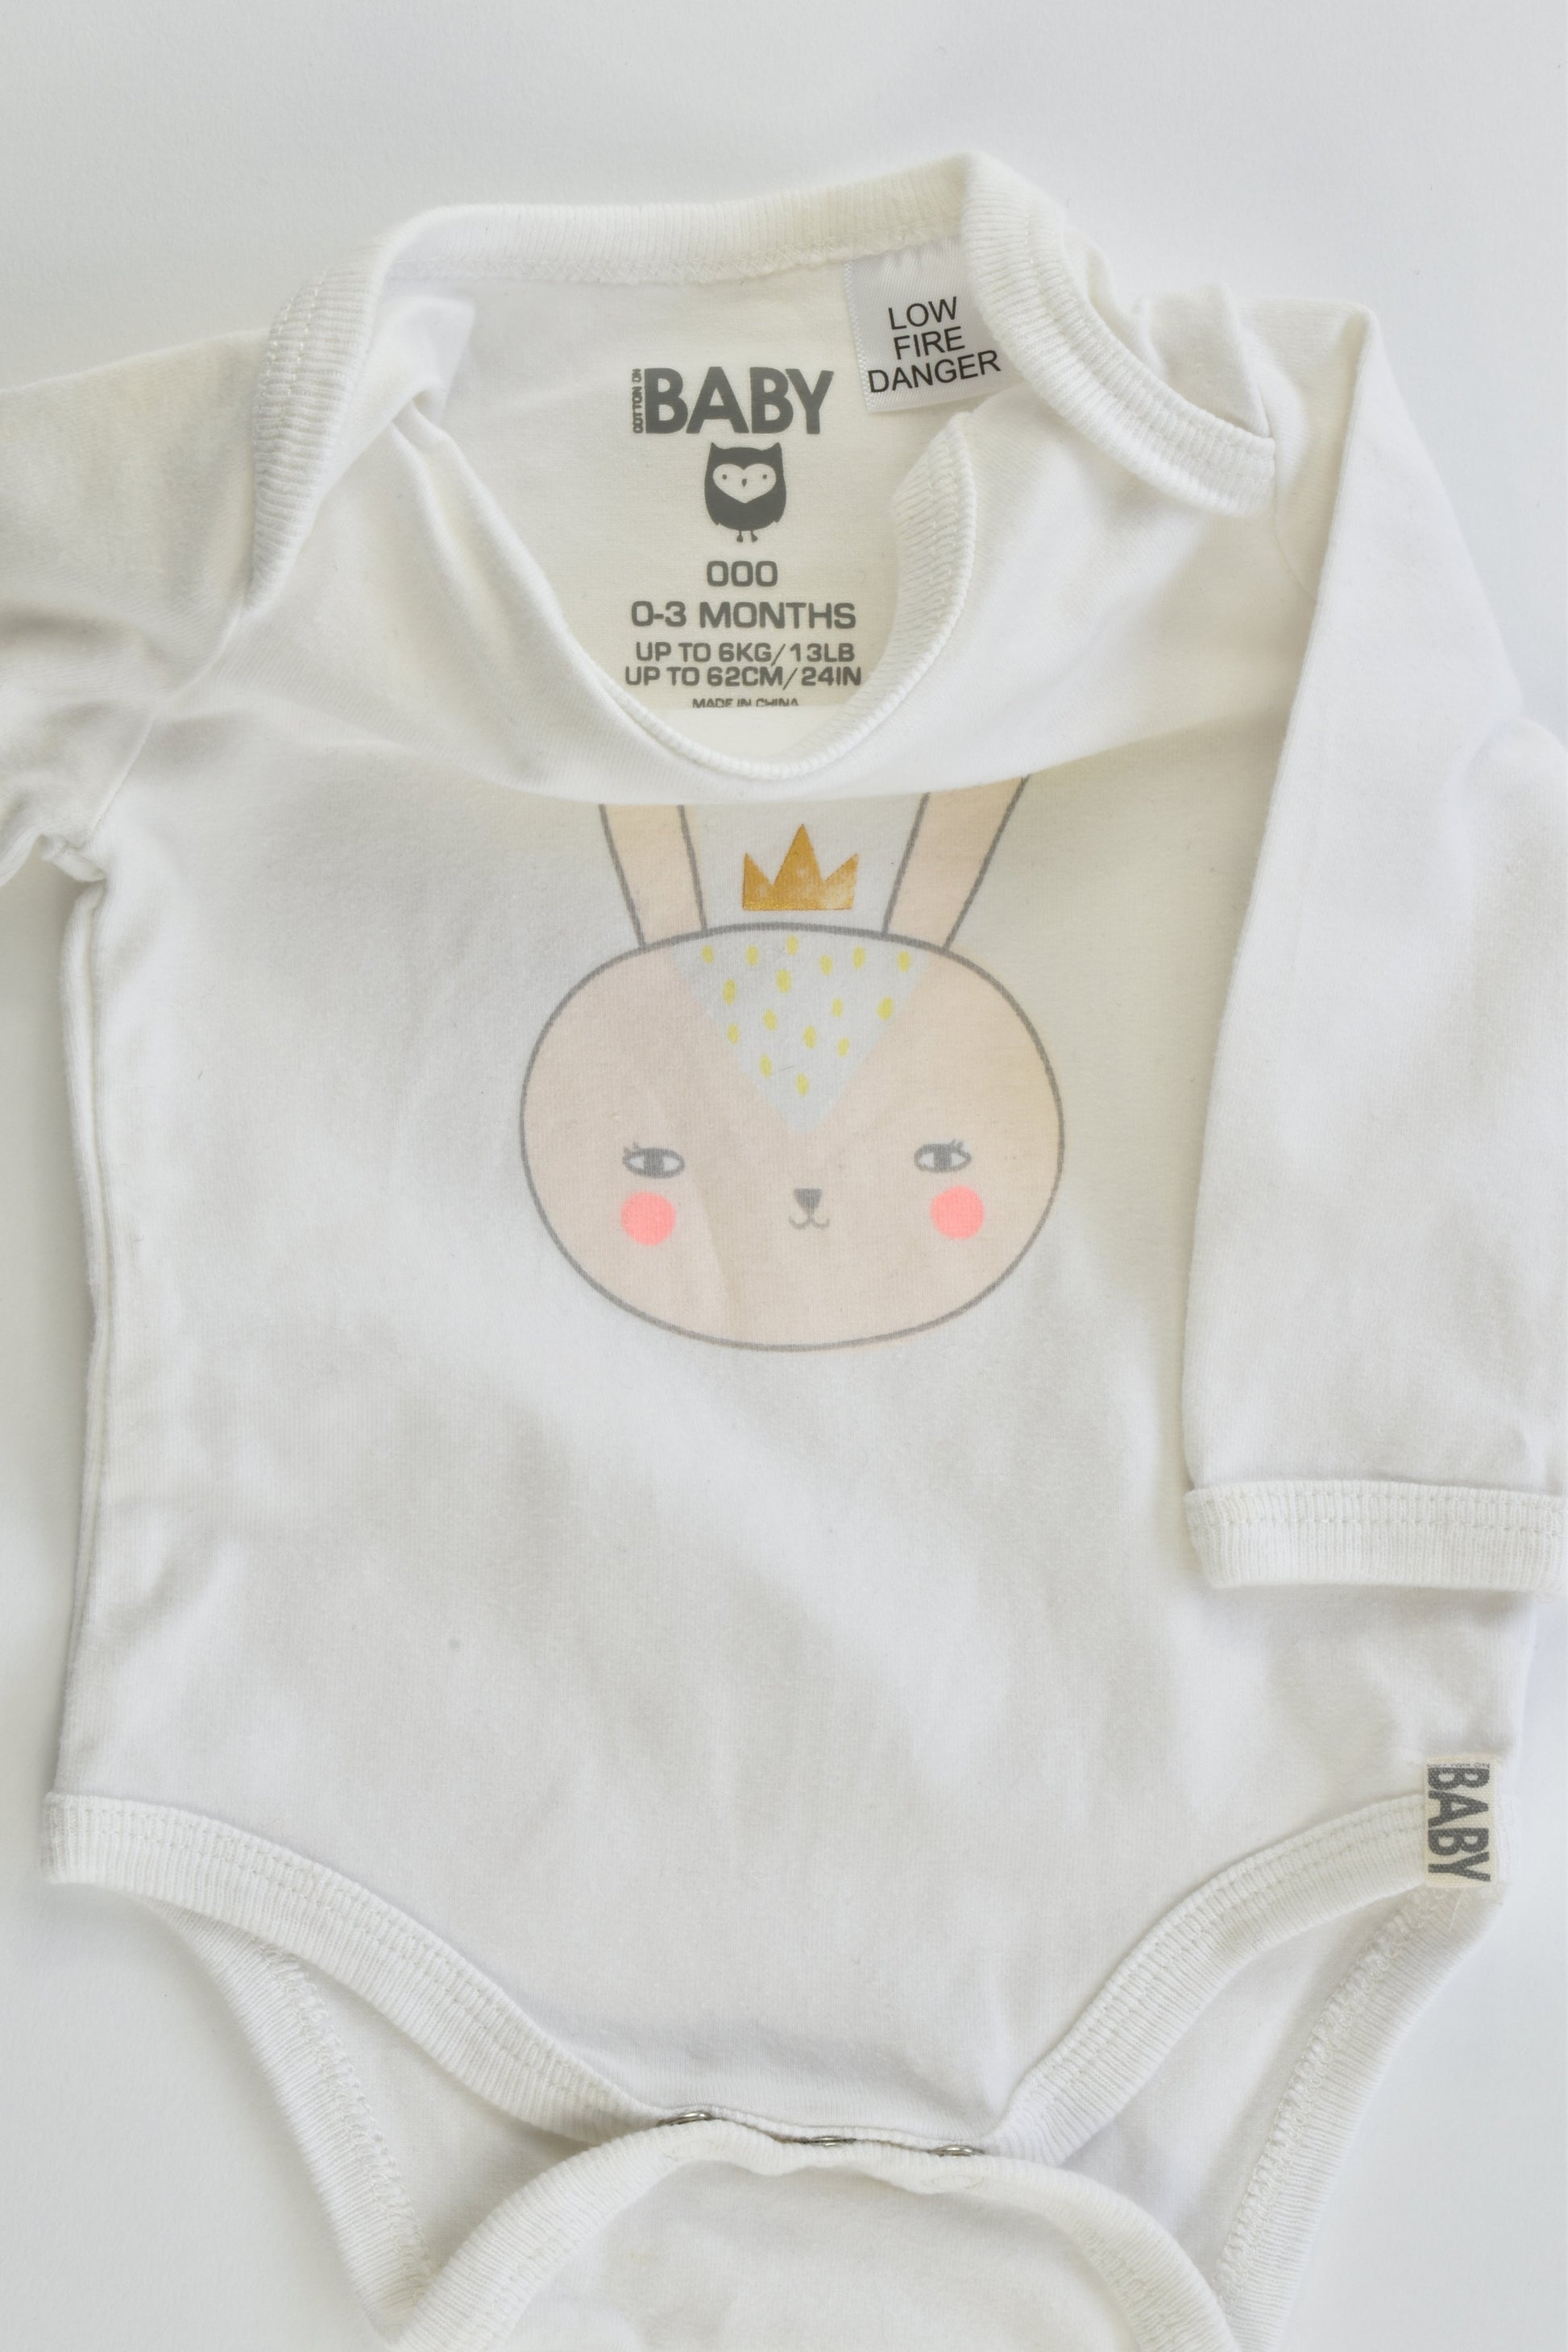 Cotton On Baby Size 000 (0-3 months, 62 cm) Bunny Bodysuit